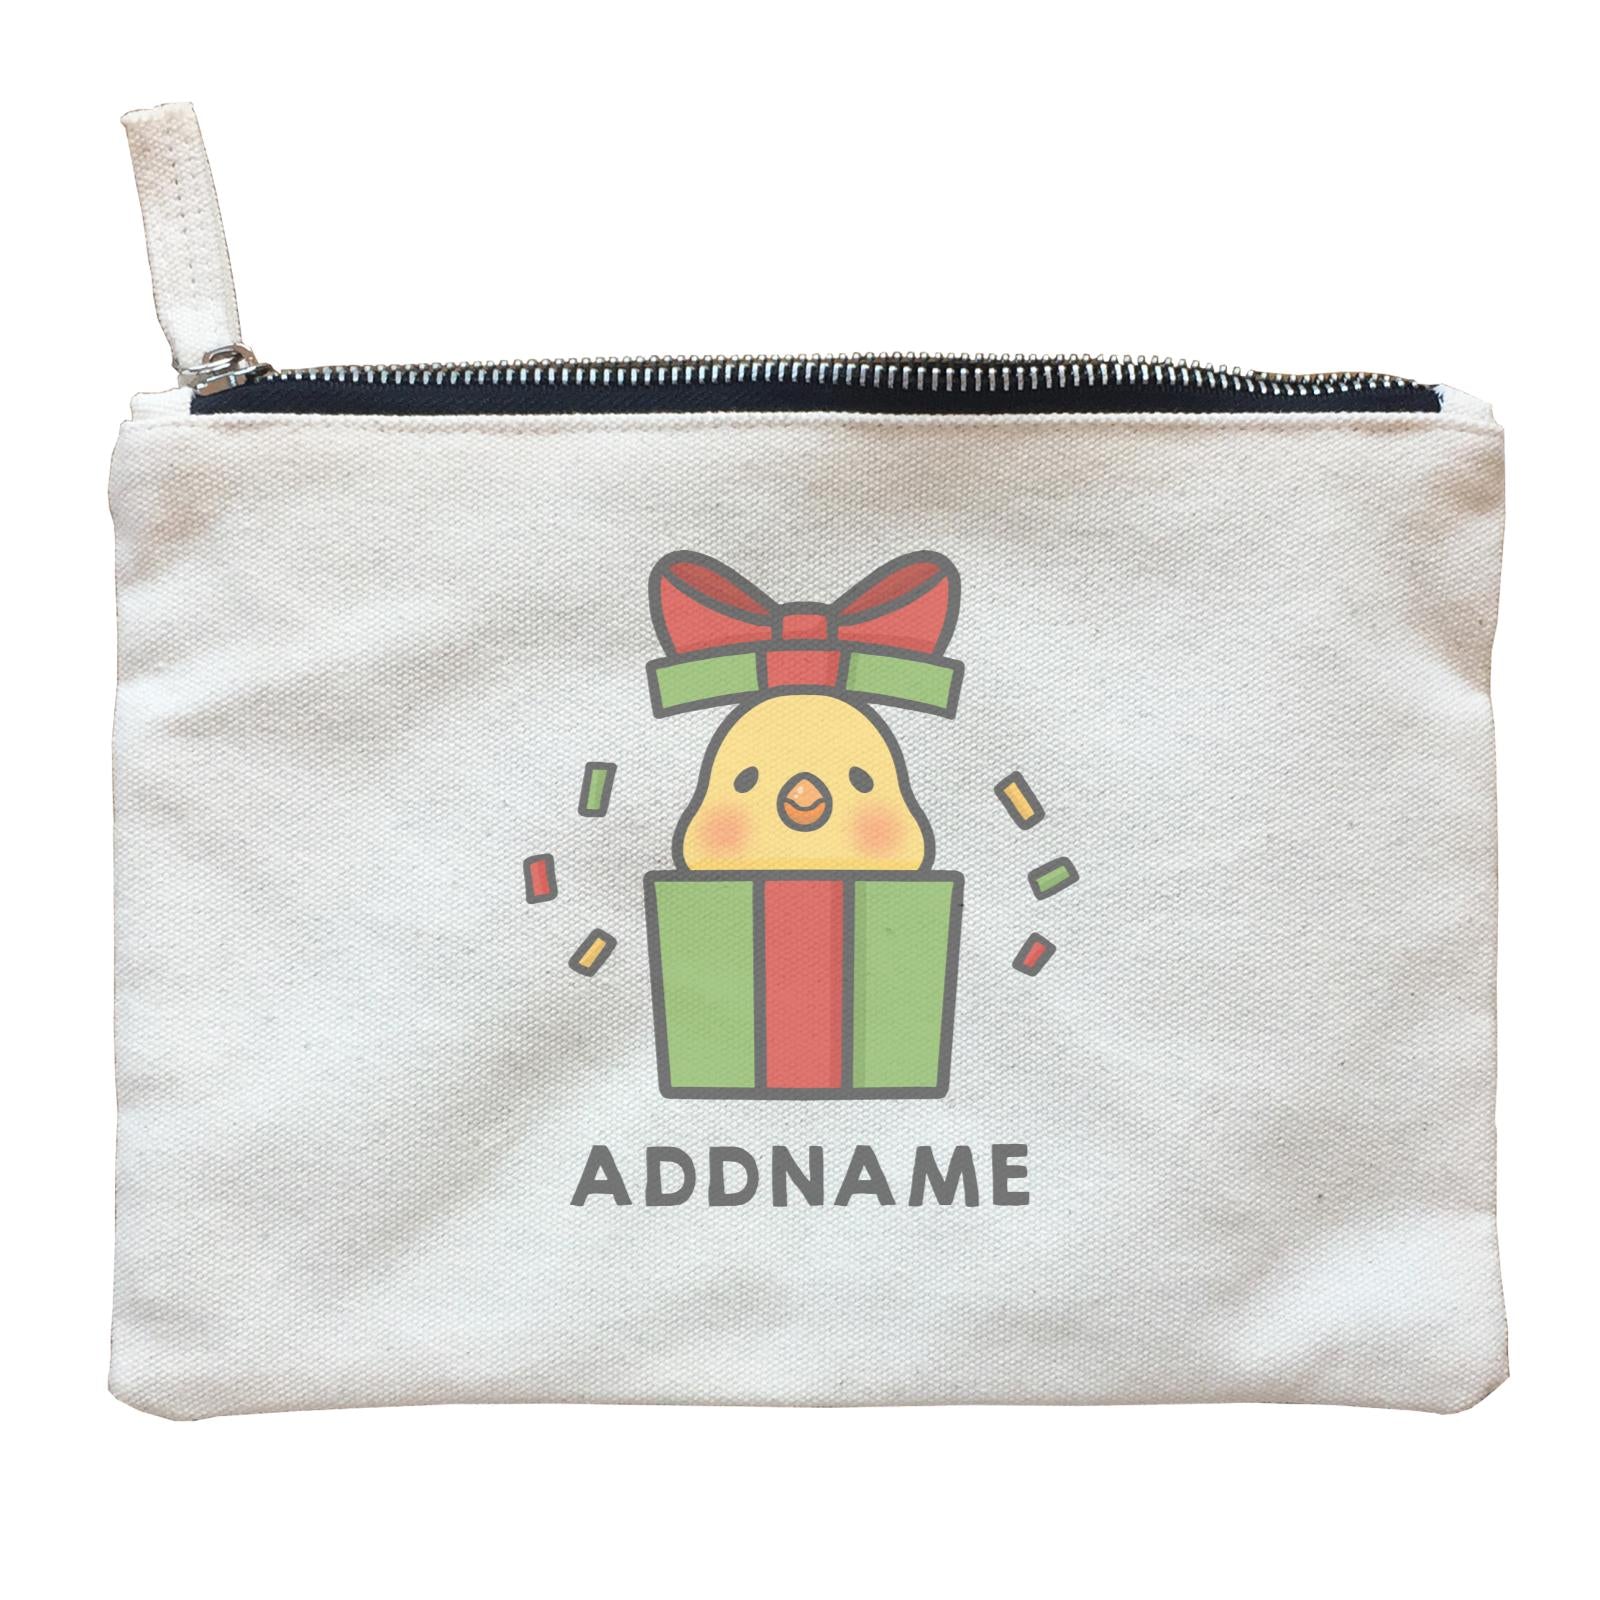 Xmas Cute Chick In Gift Box Addname Accessories Zipper Pouch